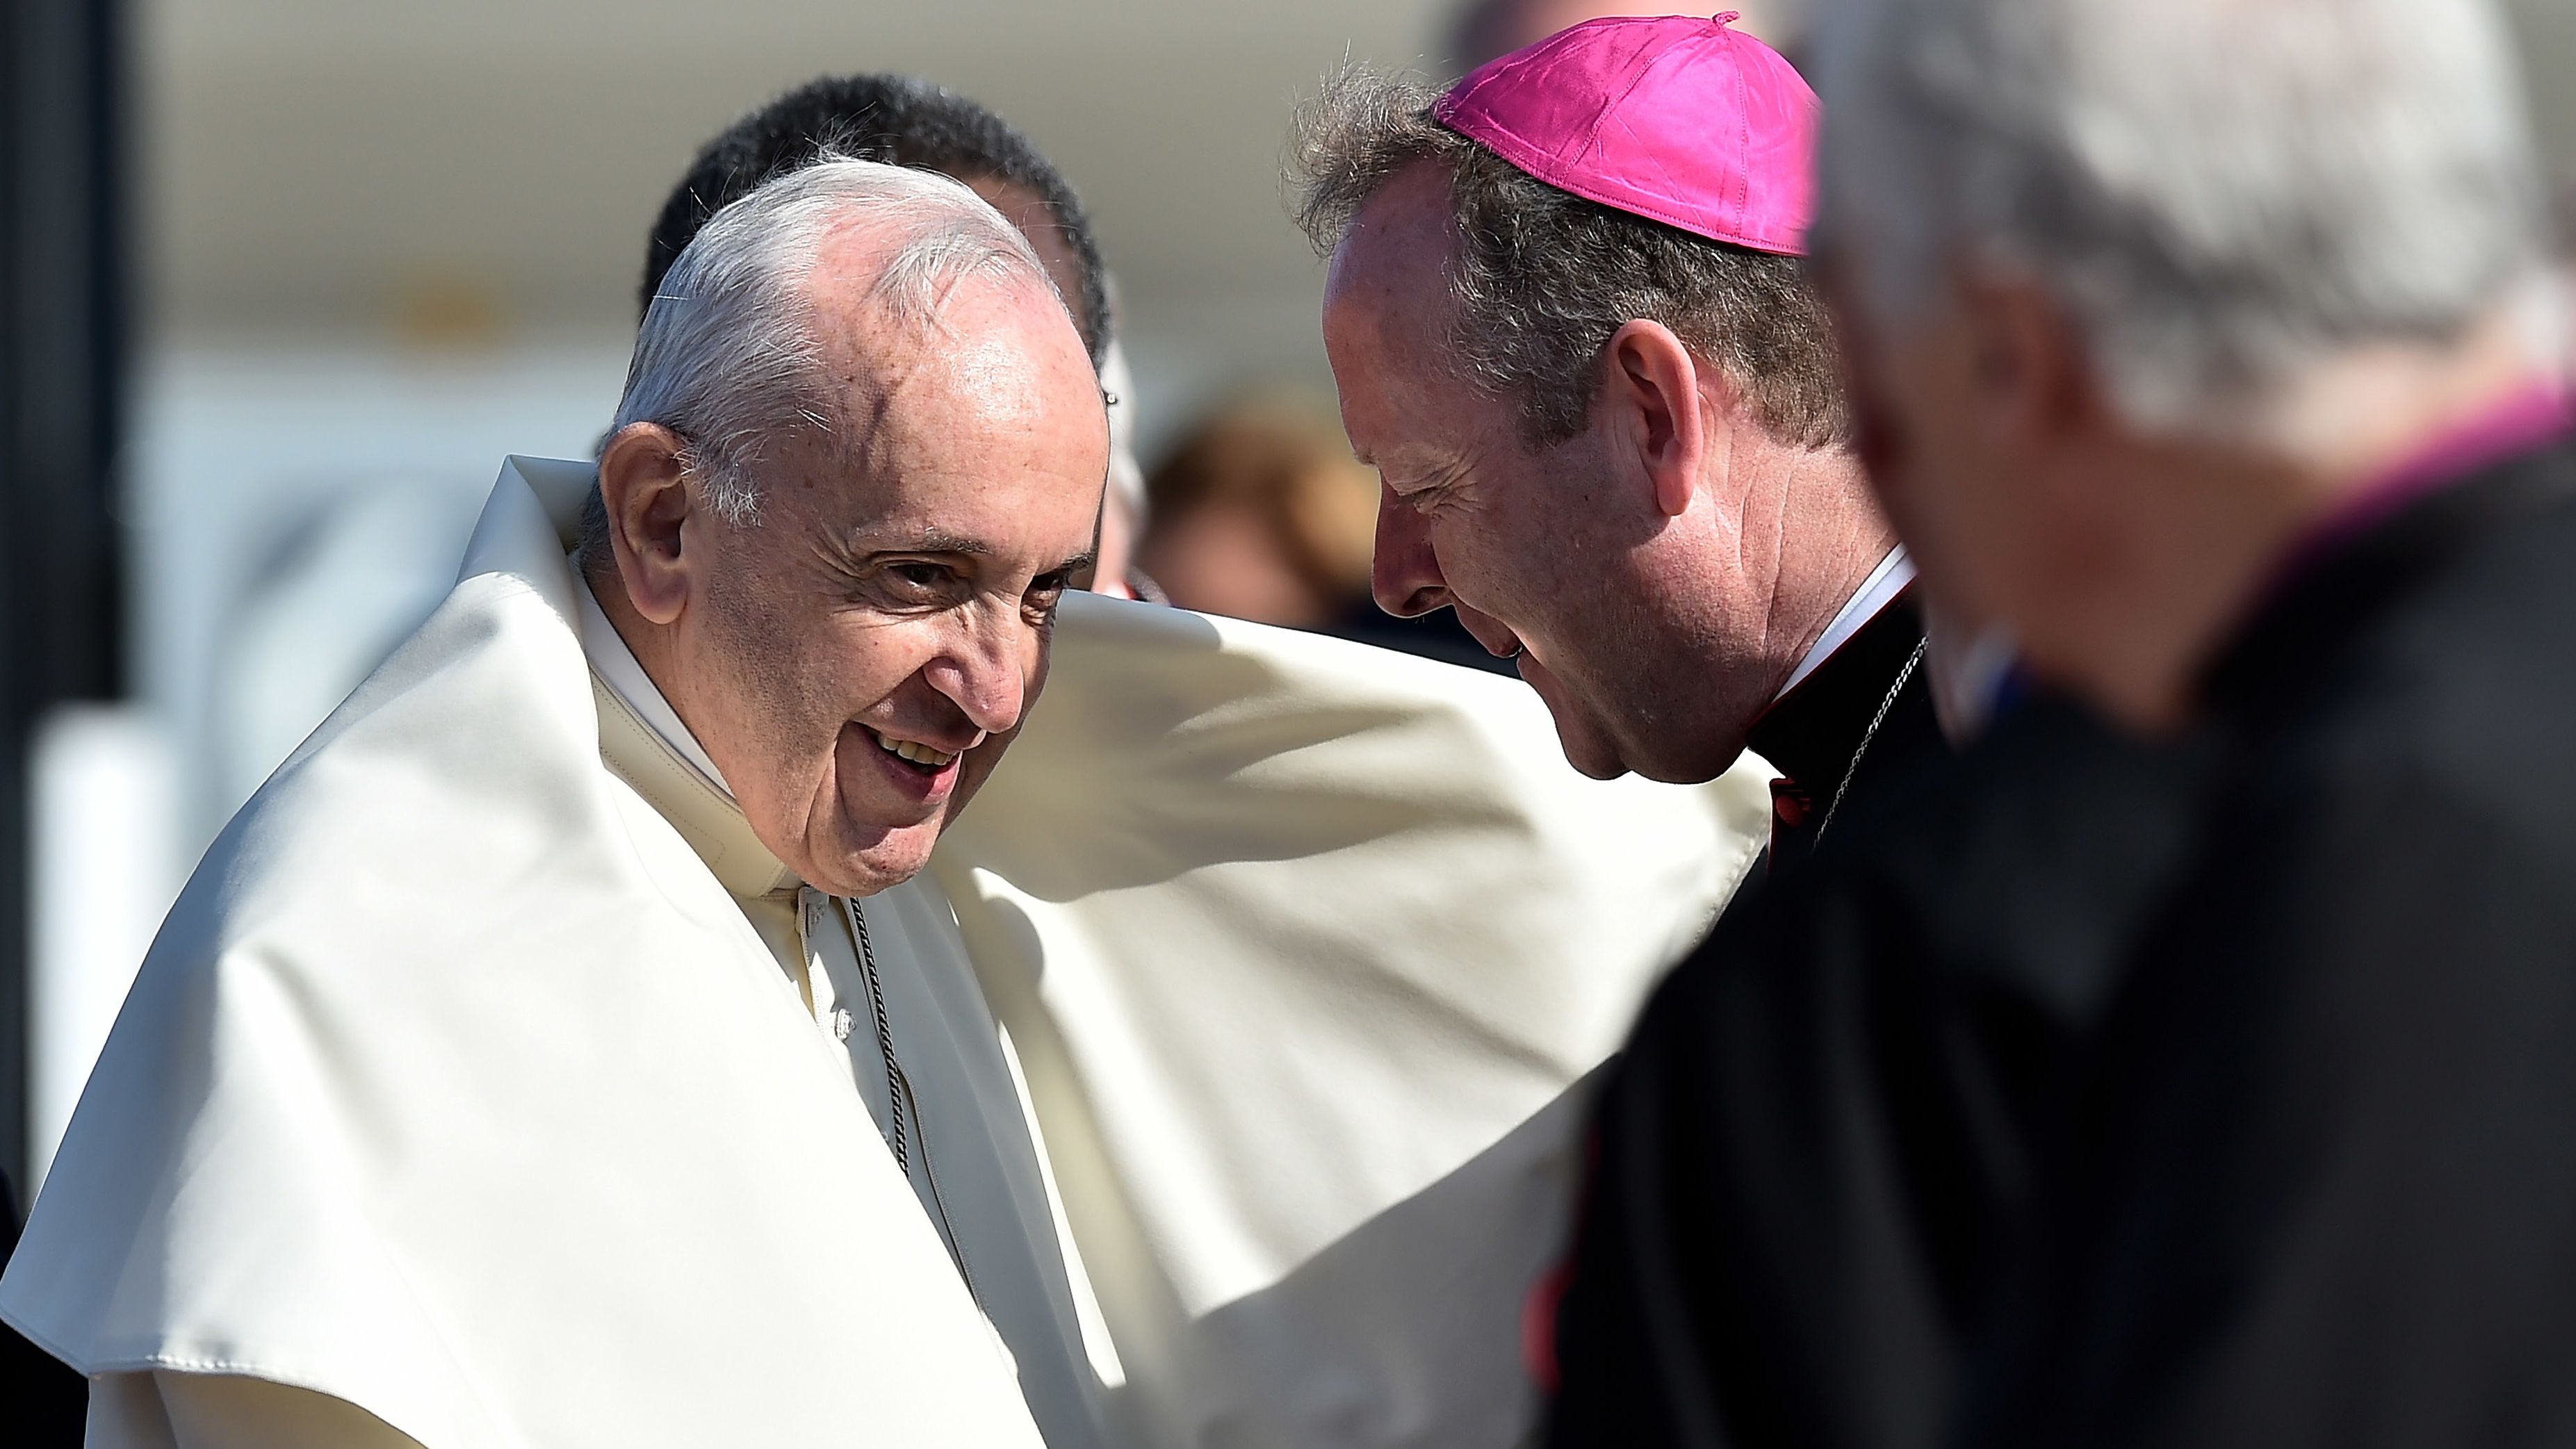 The Pope is greeted by Archbishop Eamon Martin as he arrives at Dublin Airport on Saturday.